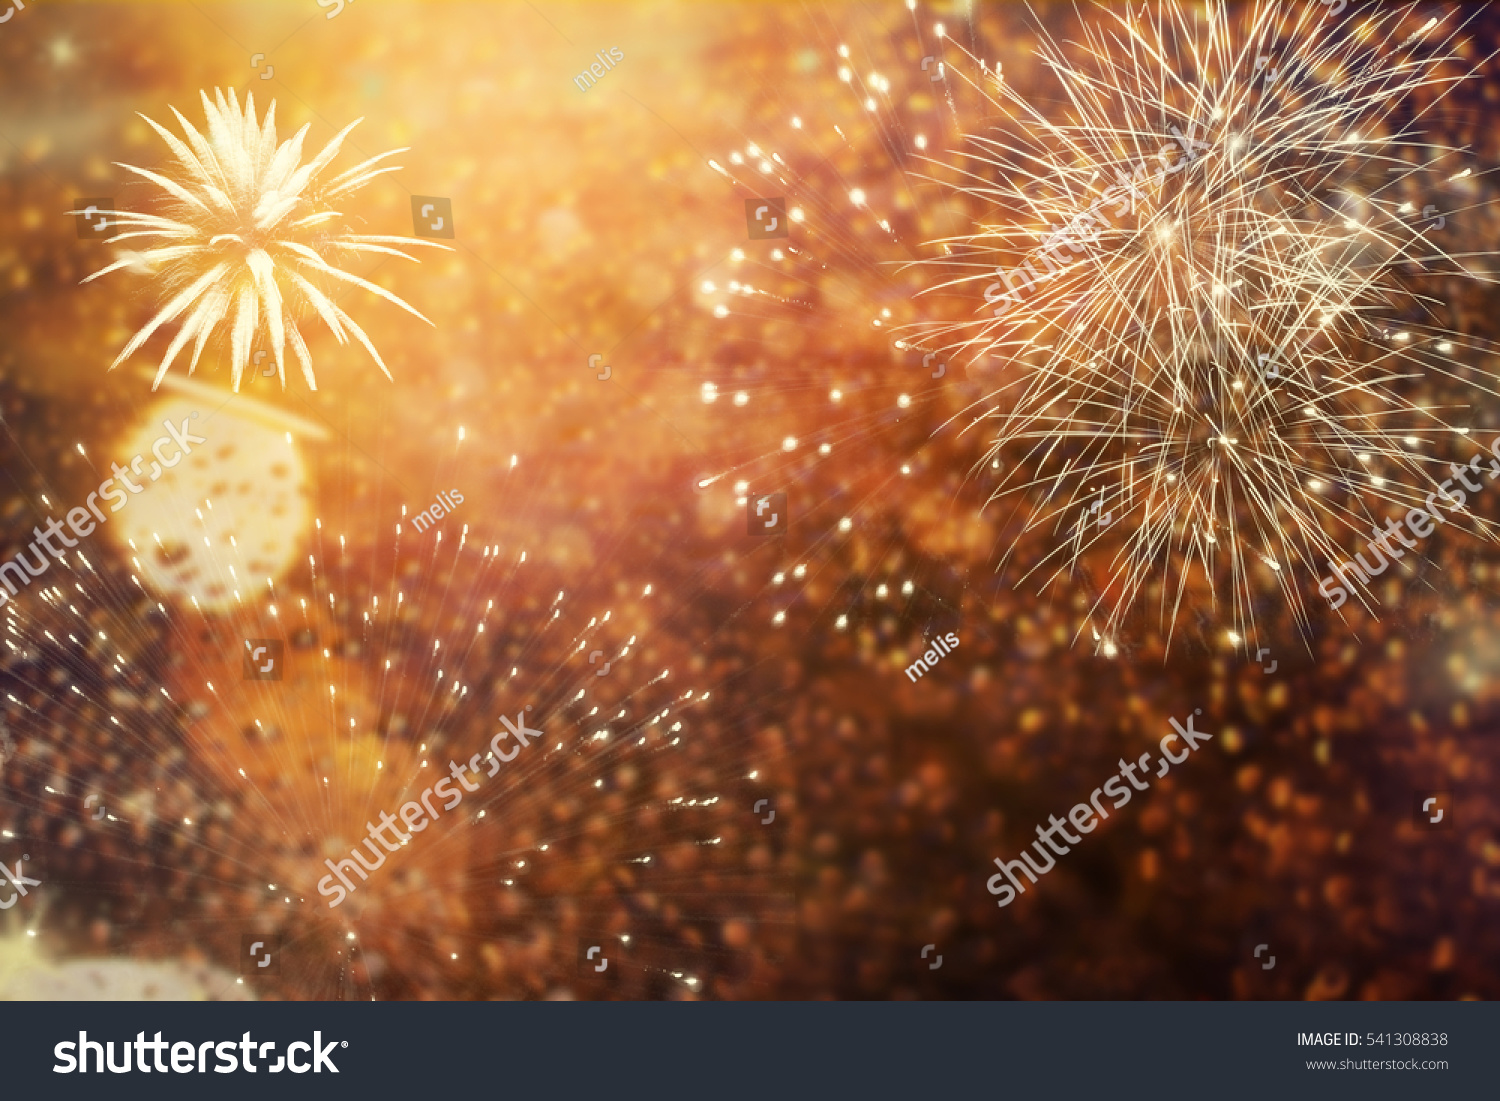 abstract holiday background - Fireworks at New Year and copy space #541308838